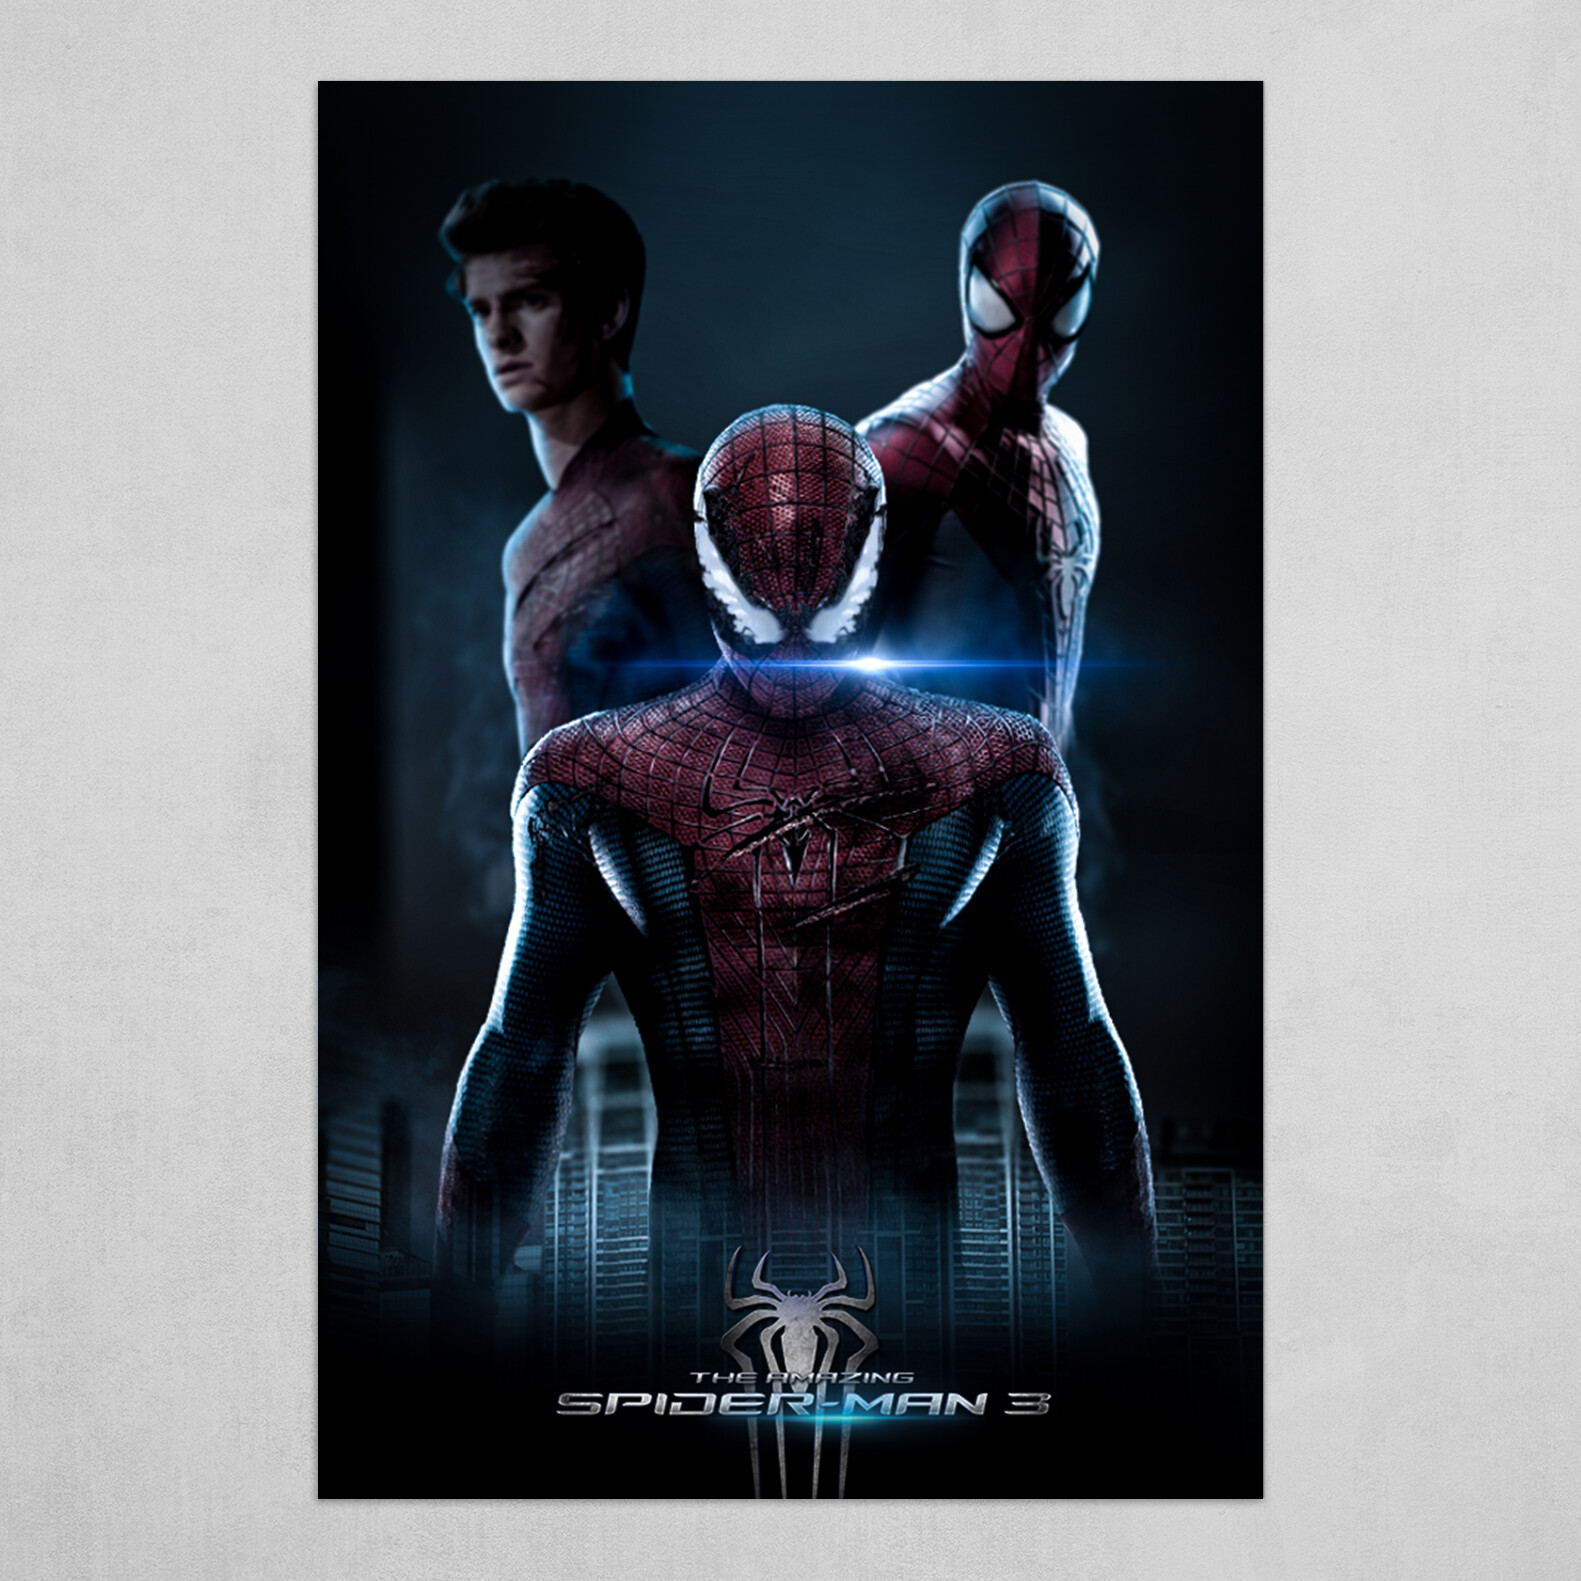 The Amazing Spider-man 3 Concept Poster by Ishan Dabi